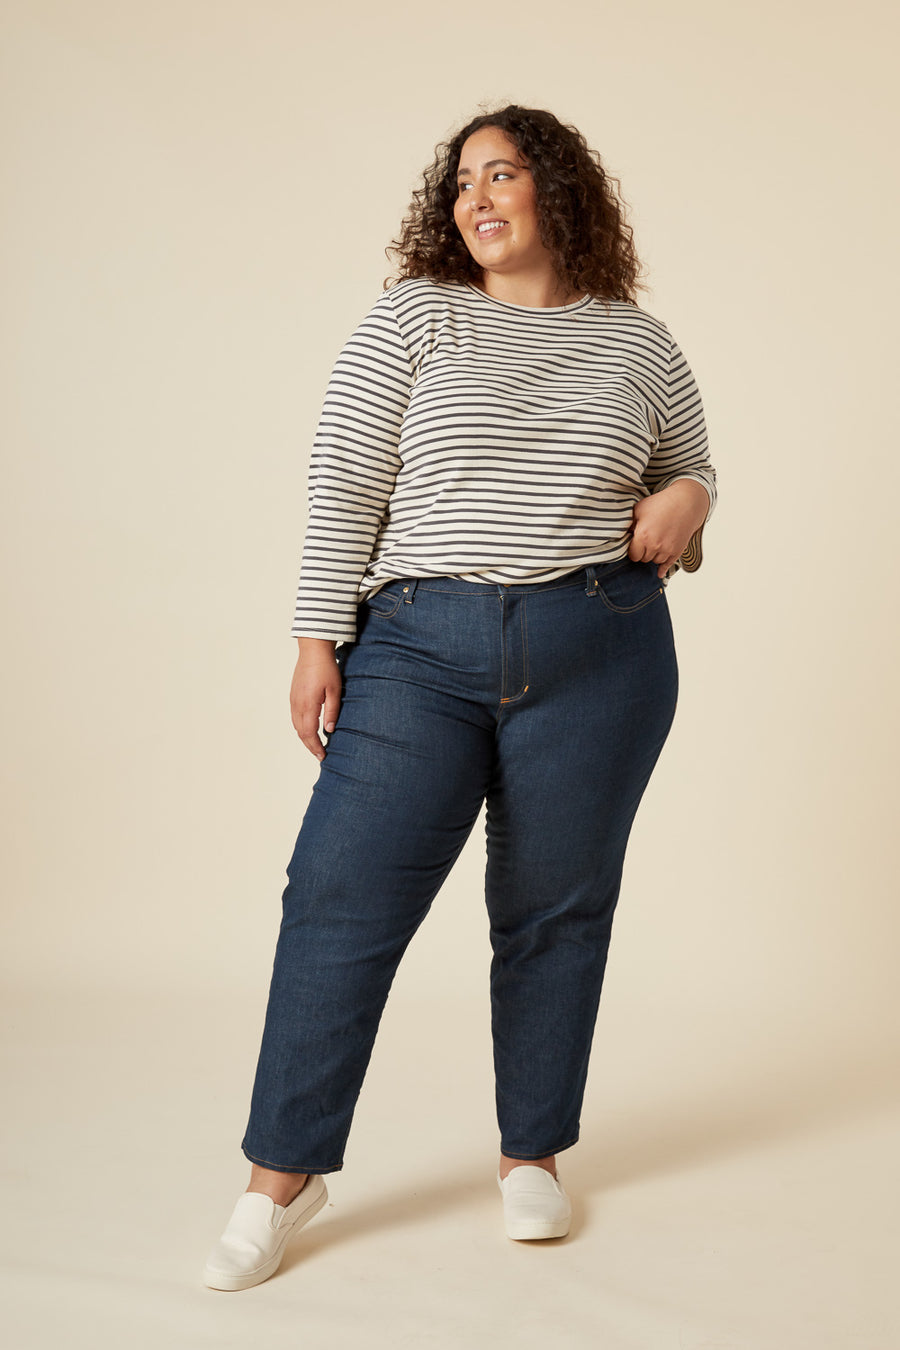 Top Stretch Jeans for Curvy Women — Autum Love